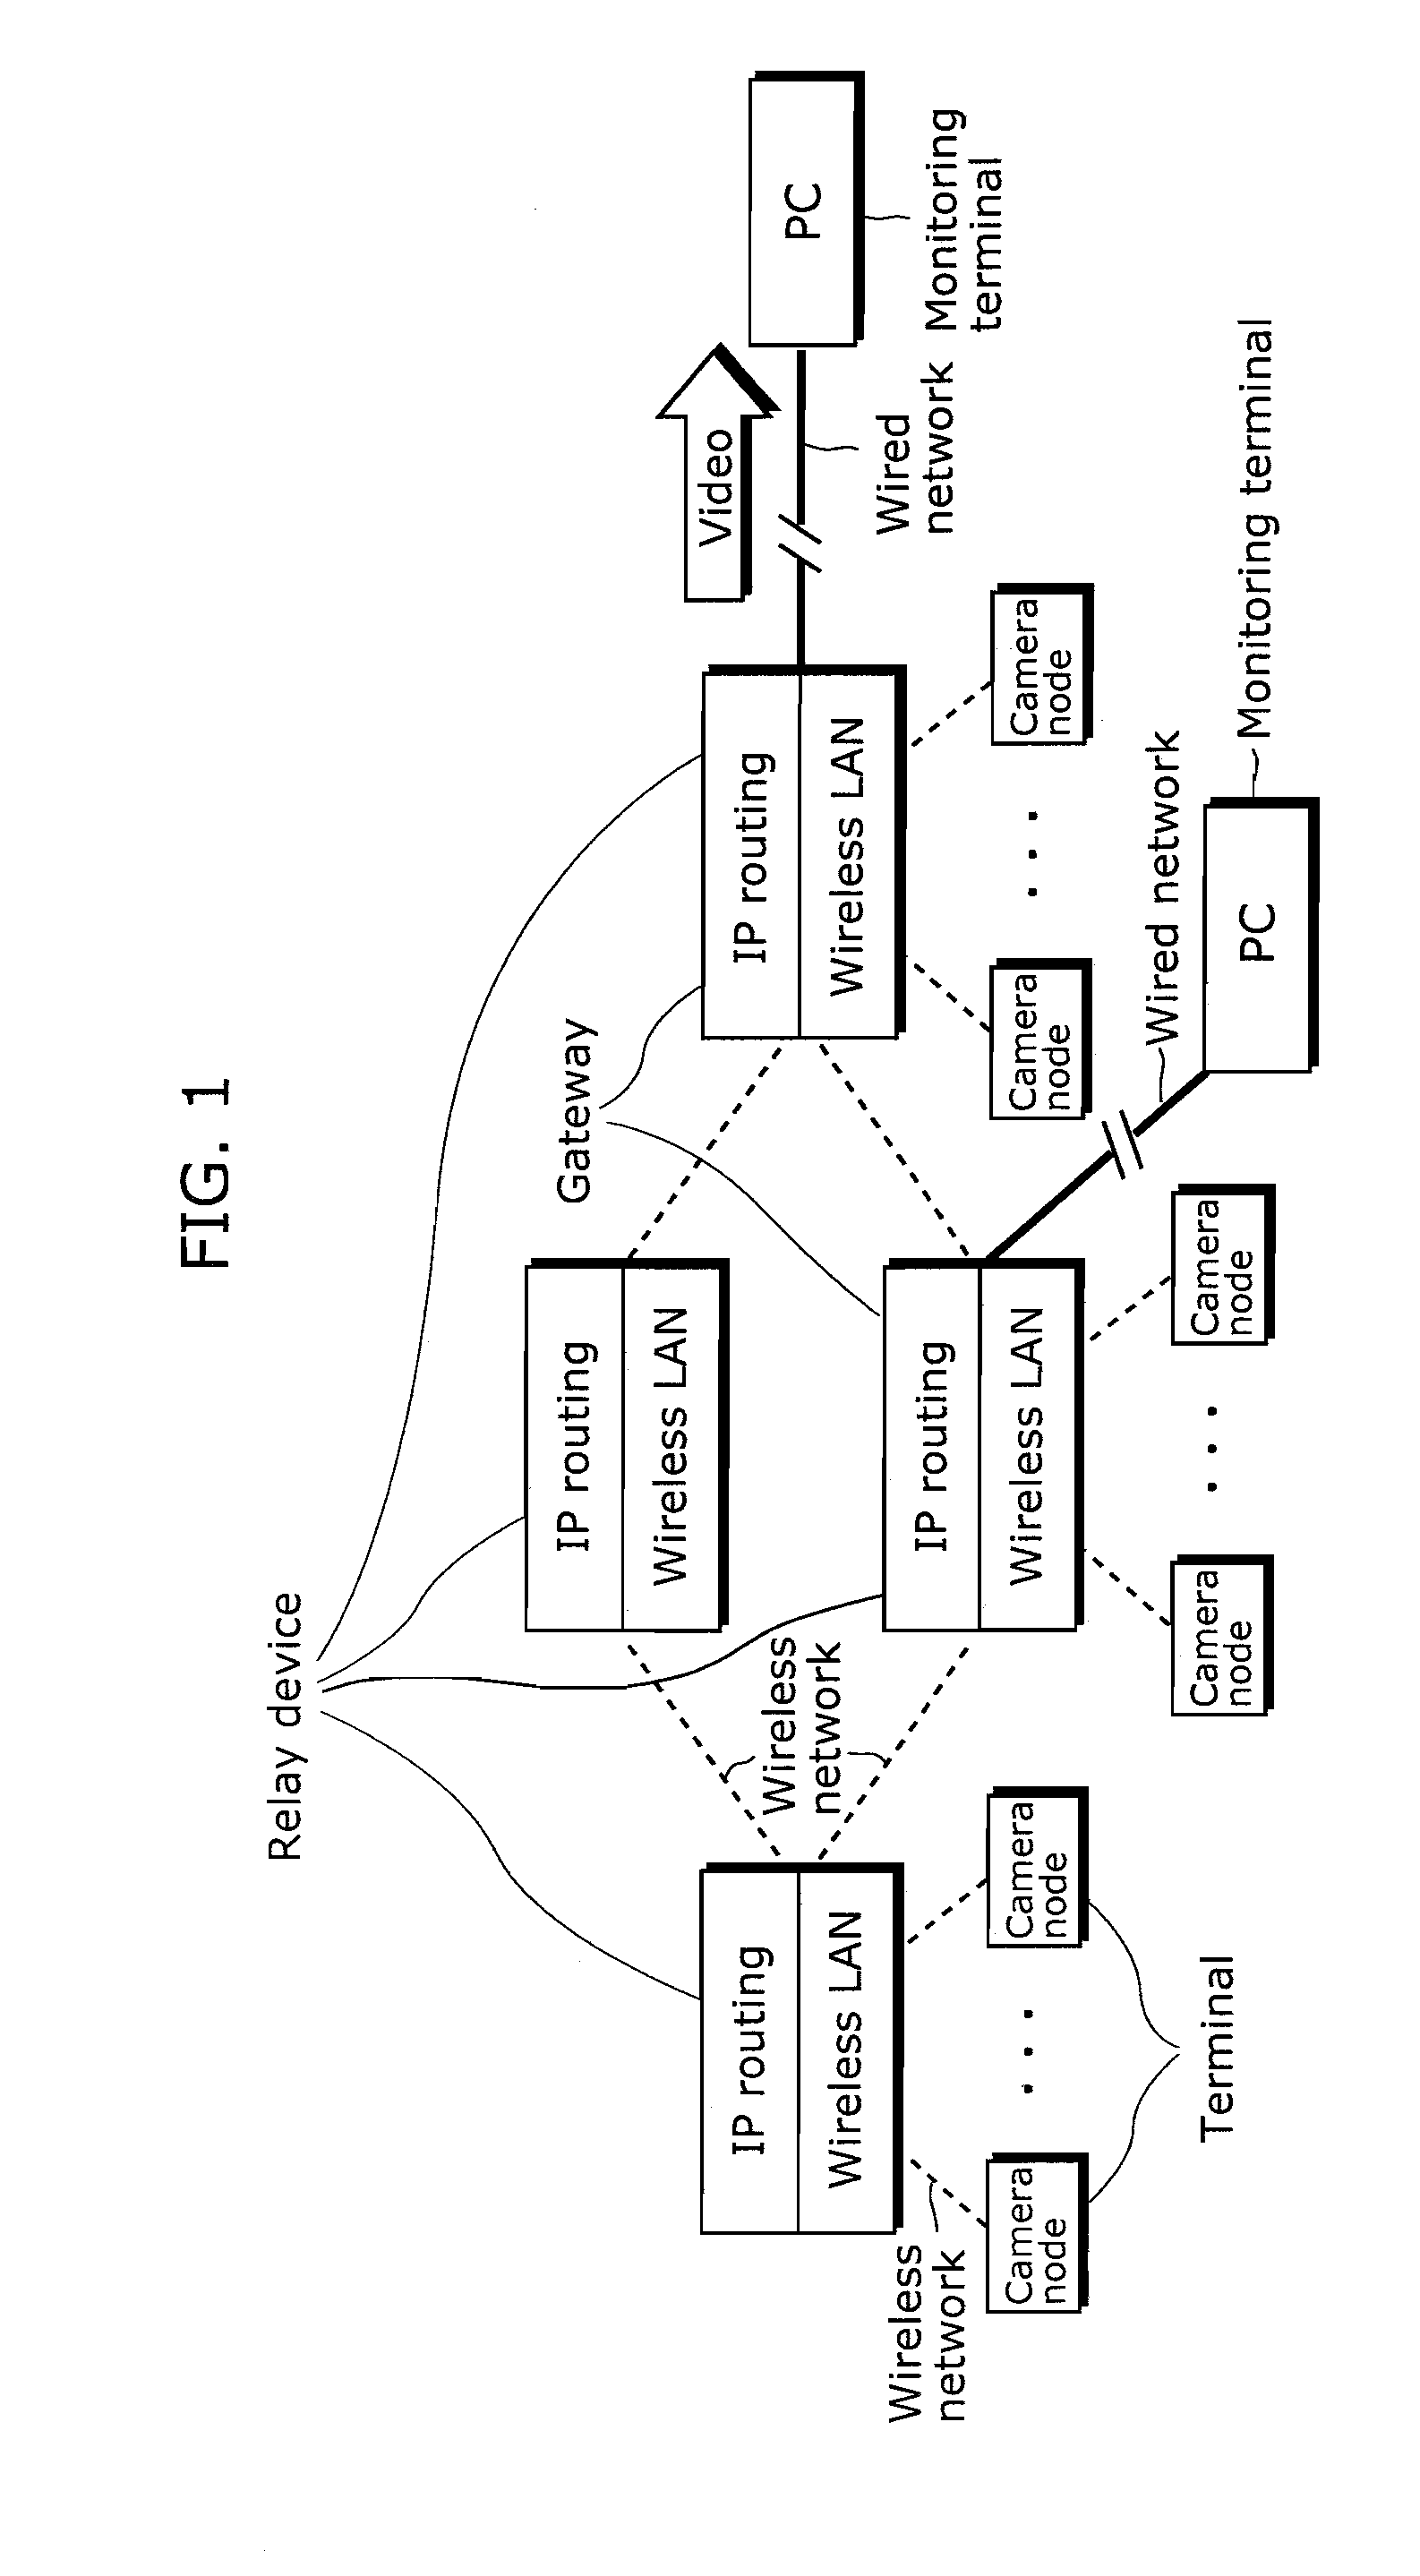 Replay transmission device and replay transmission method